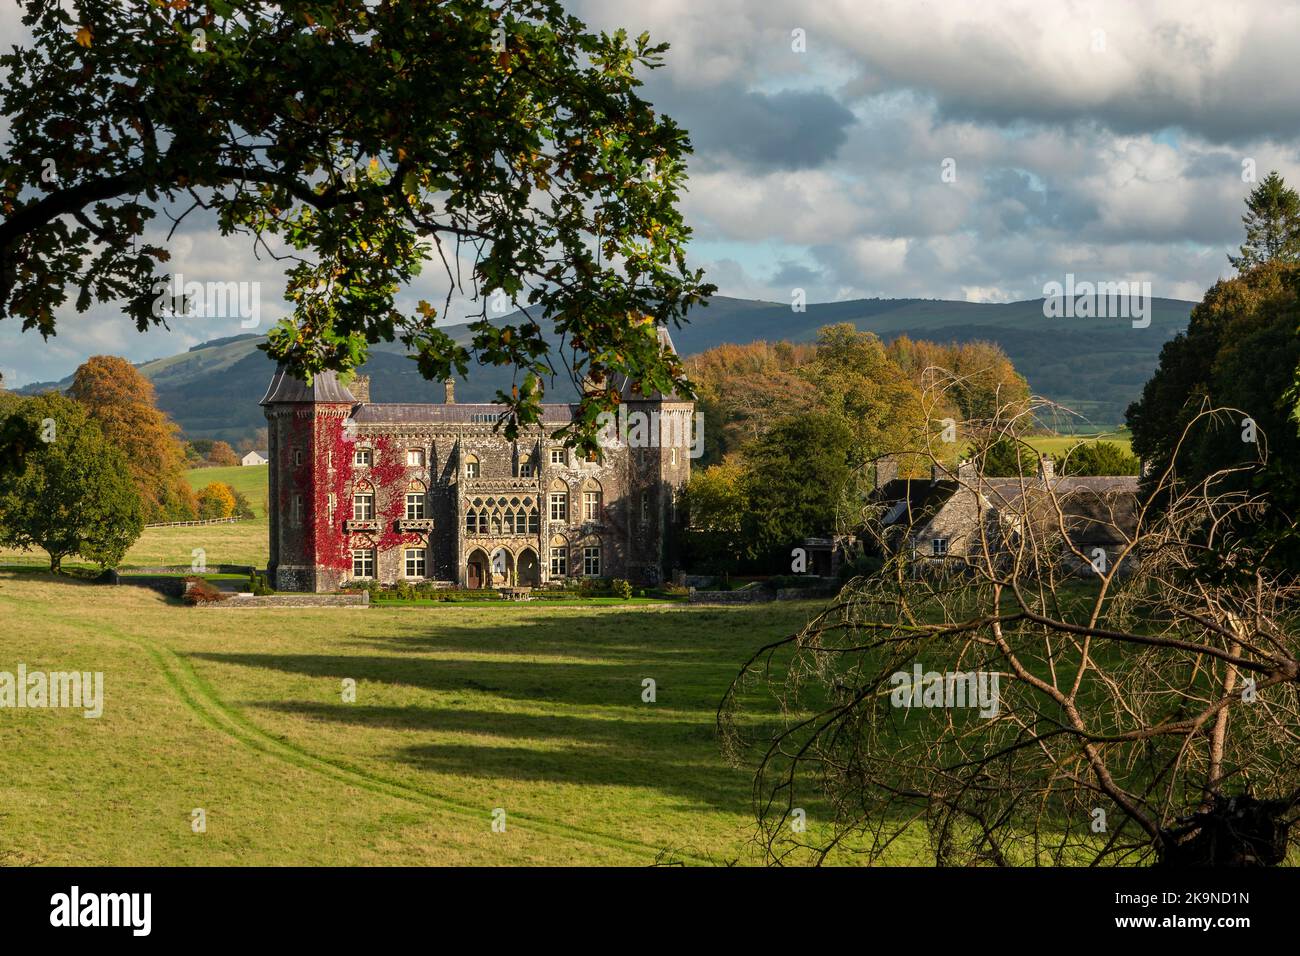 Newton House at Dinefwr Park, Carmathenshire, Wales. Grade 2 listed building, constructed in 1660. Stock Photo